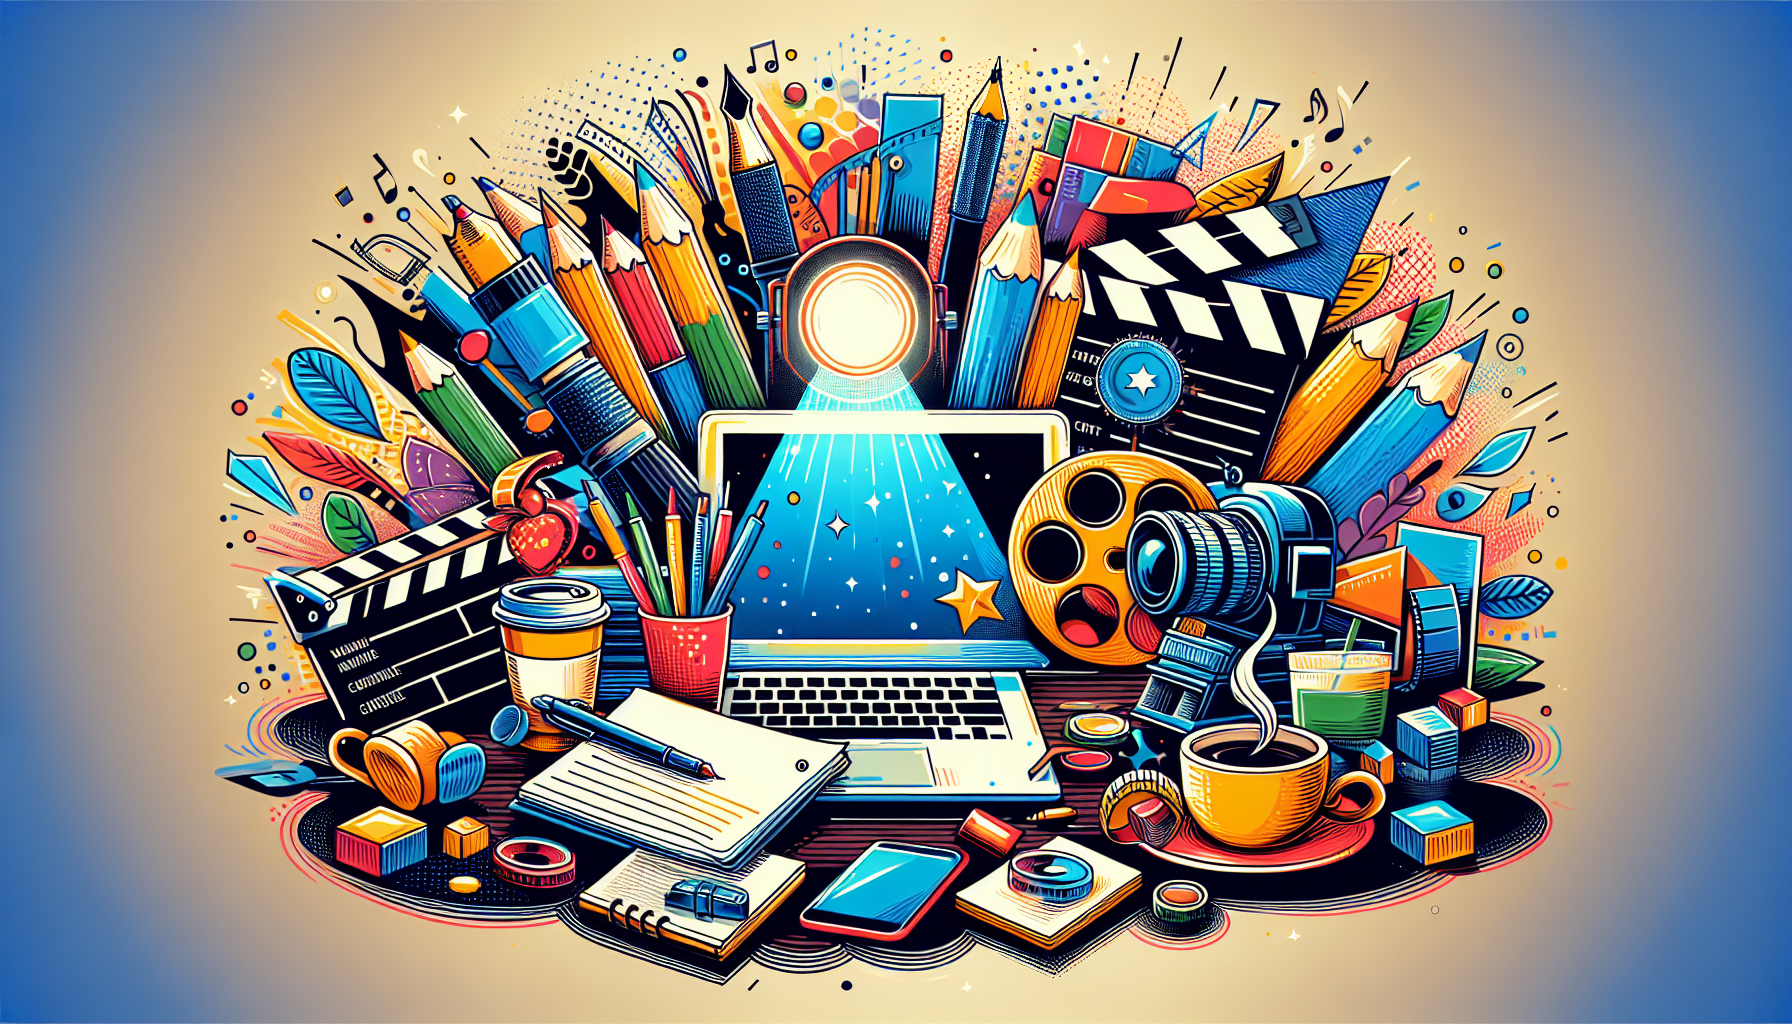 A creative and vibrant illustration representing the process of crafting a standout short film screenplay. The picture should be filled with modern items equivalent to writing screenplay such as laptops, fountain pens, notepads, coffee cups, and film reels. A spotlight illuminating the table holding these items symbolizes the importance of the process. Bright, catchy colors should be used to emphasize the creativity involved. Make sure to include a visually appealing background with abstract shapes and patterns, denoting a modern artistic style. The picture should not contain any words.